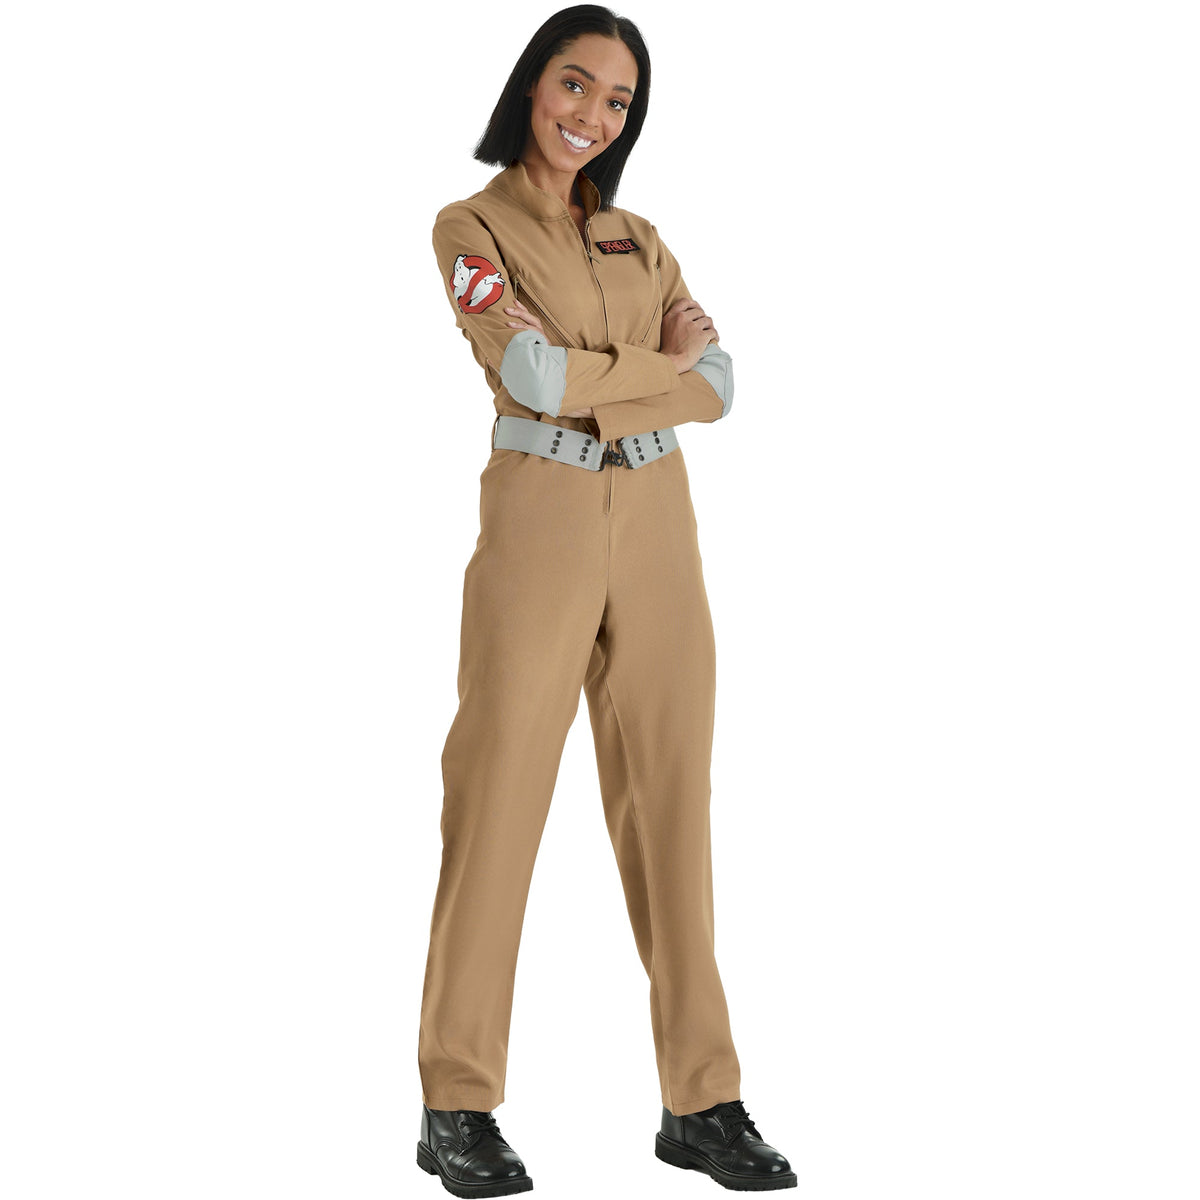 HALLOWEEN COSTUME CO. Costumes Ghostbusters Classic Costume for Adults, Jumpsuit and Belt